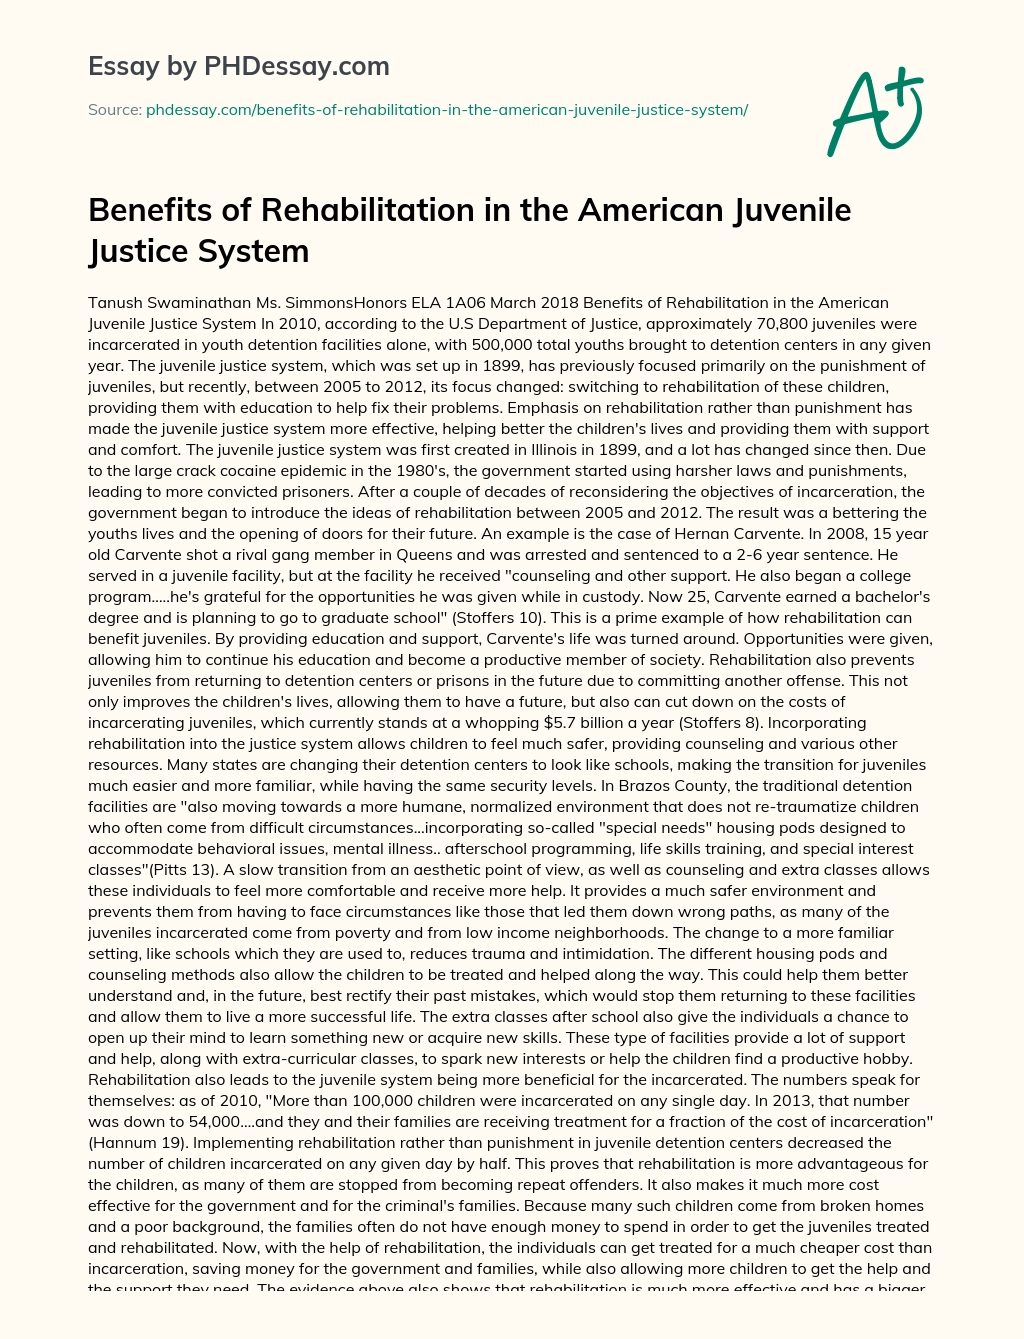 Benefits of Rehabilitation in the American Juvenile Justice System essay